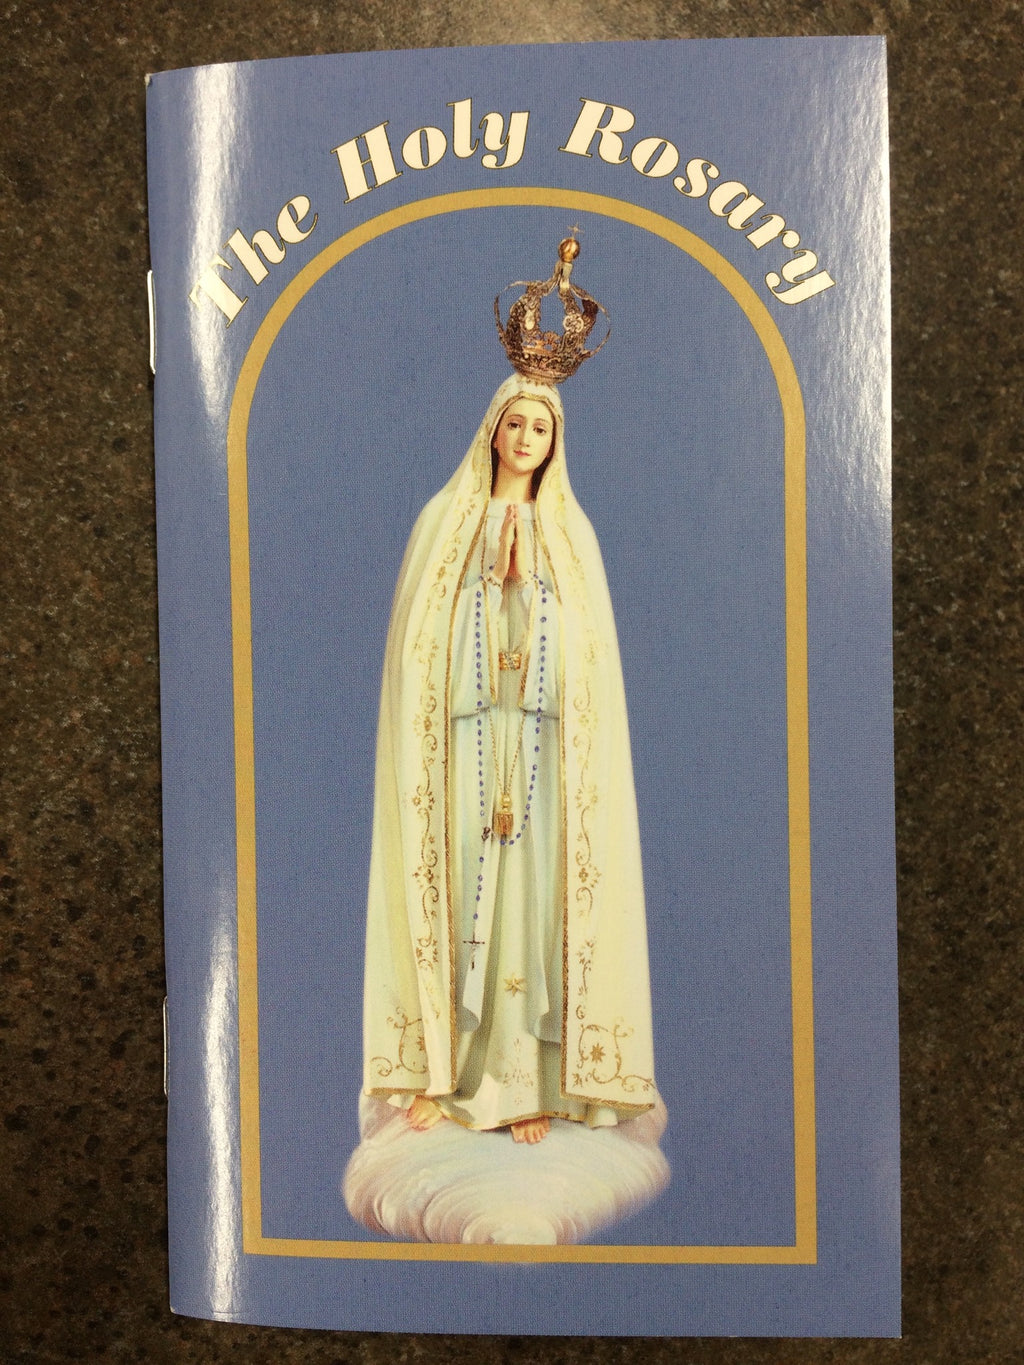 THE HOLY ROSARY BOOKLET